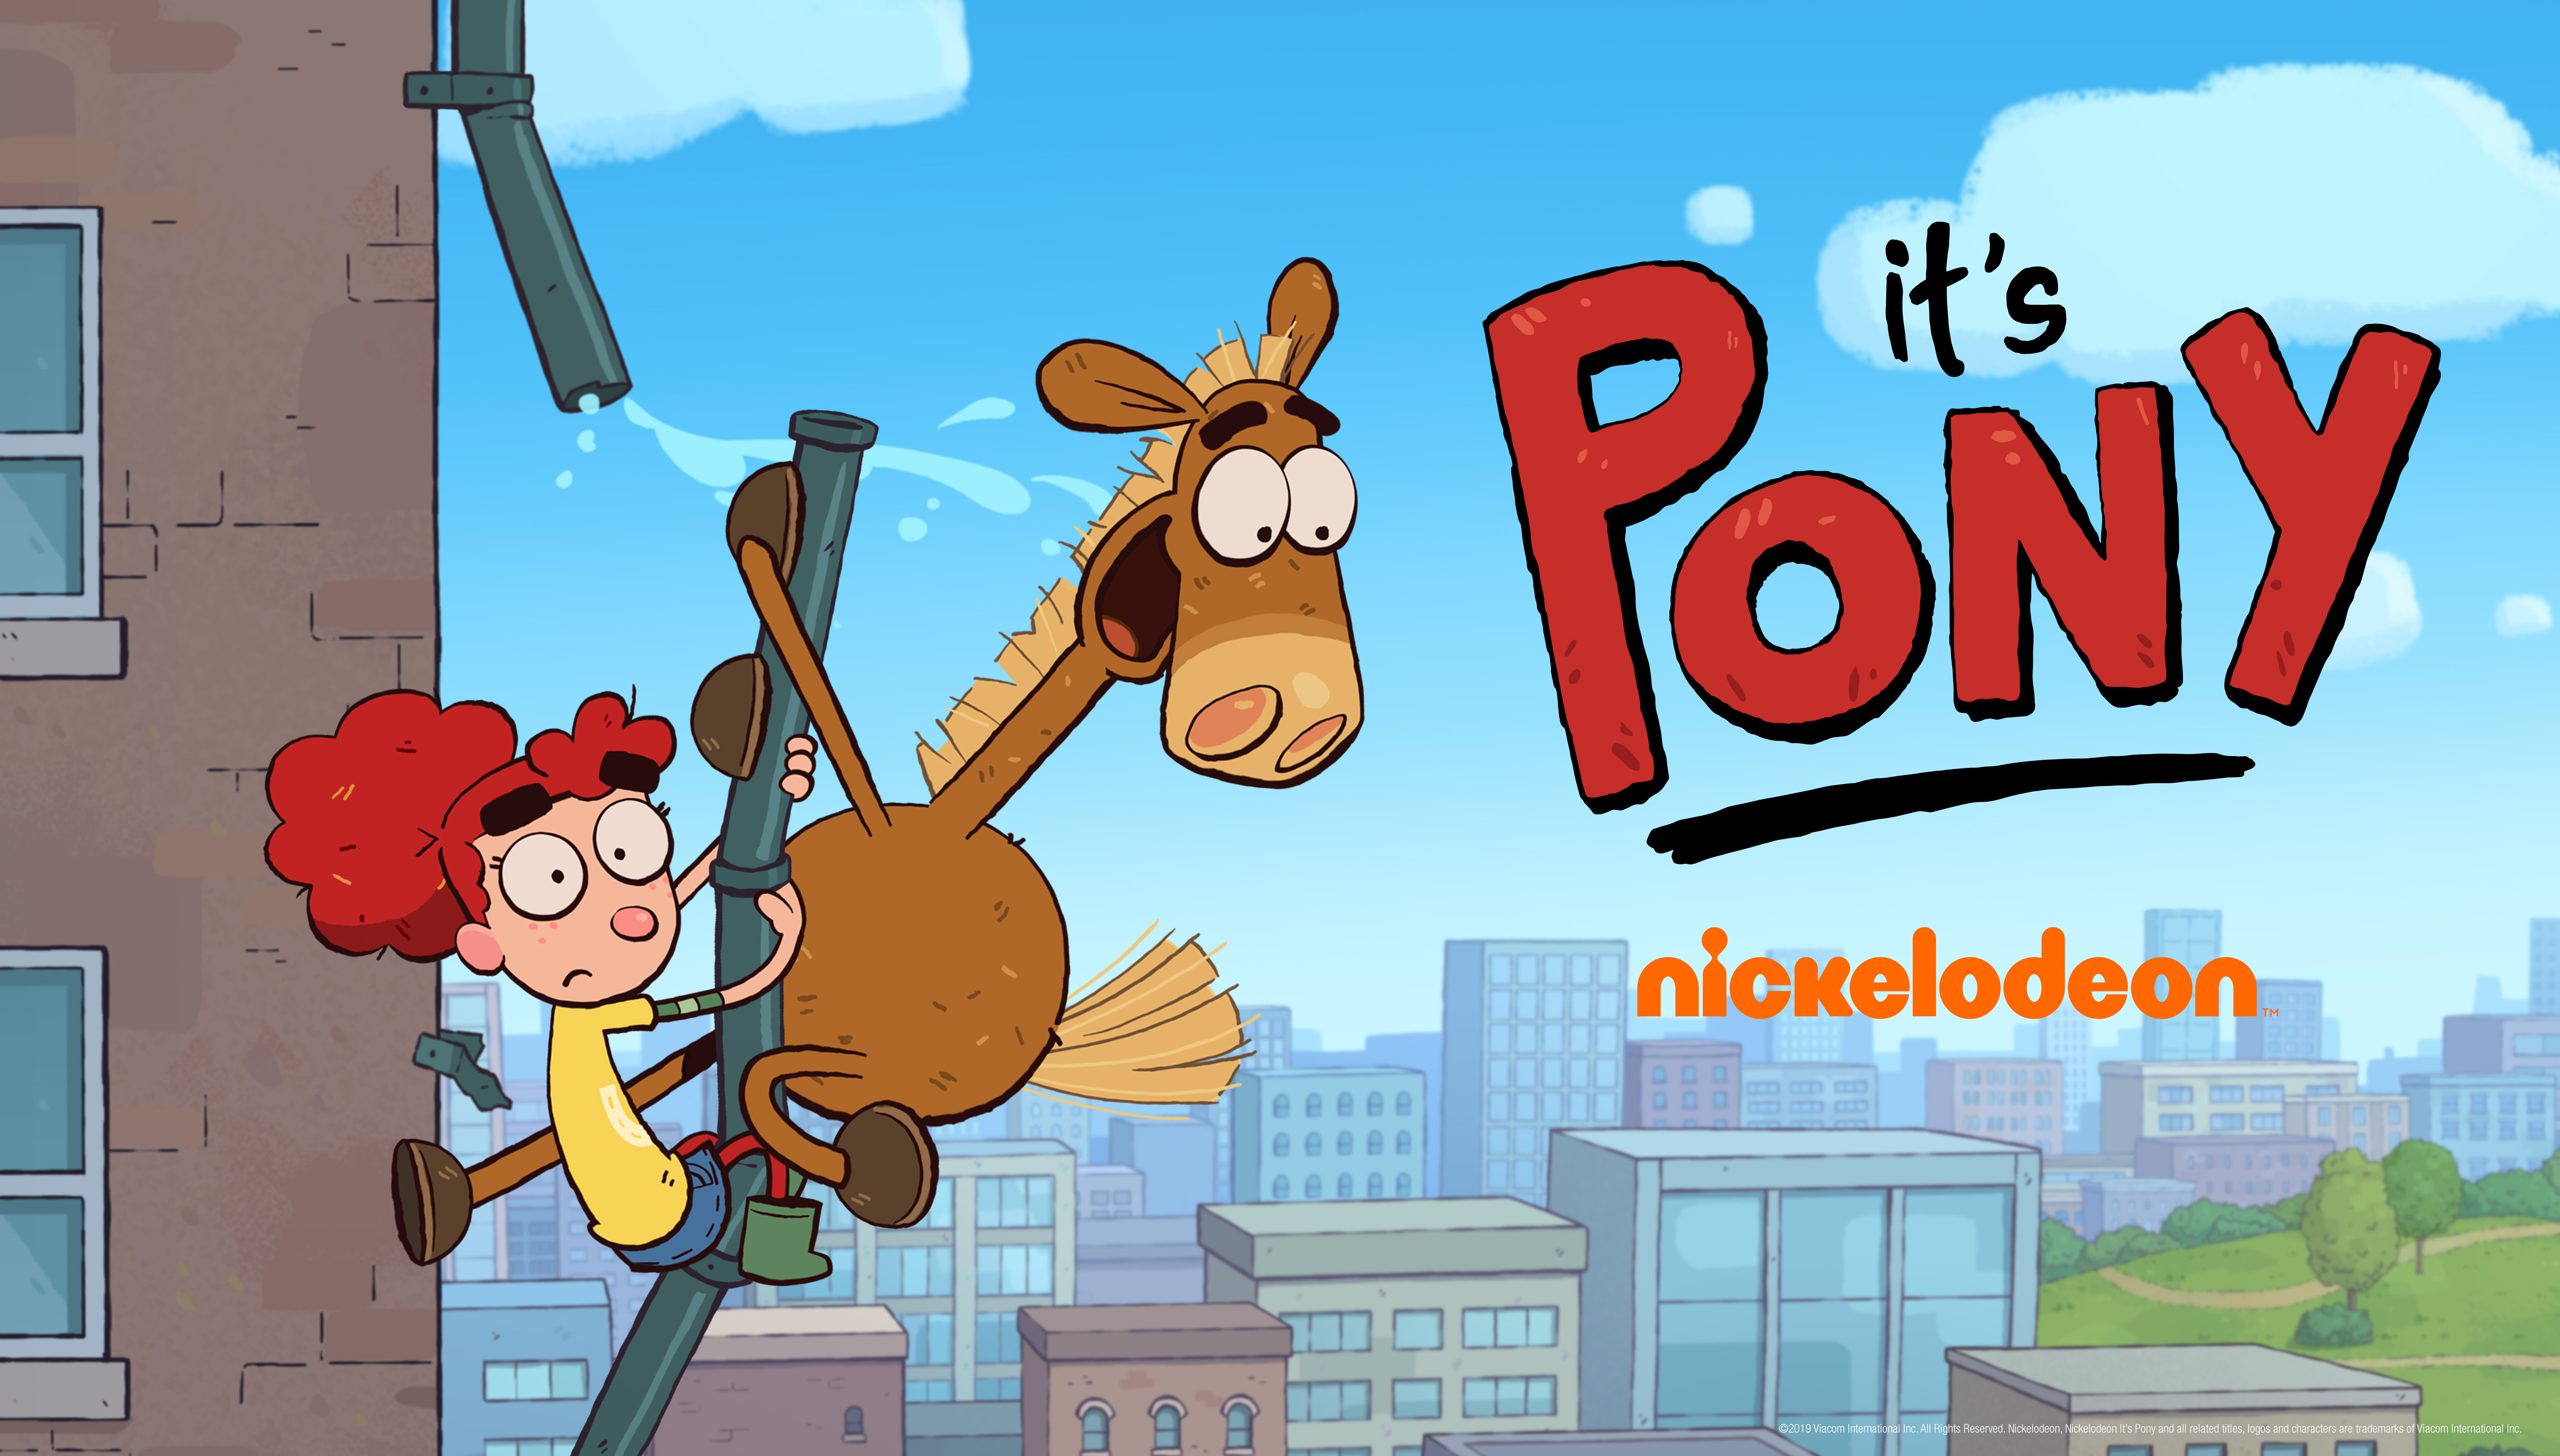 Nickelodeon Debuts Brand-New Animated Series, It's Pony, Saturday, Jan. 18  | Business Wire